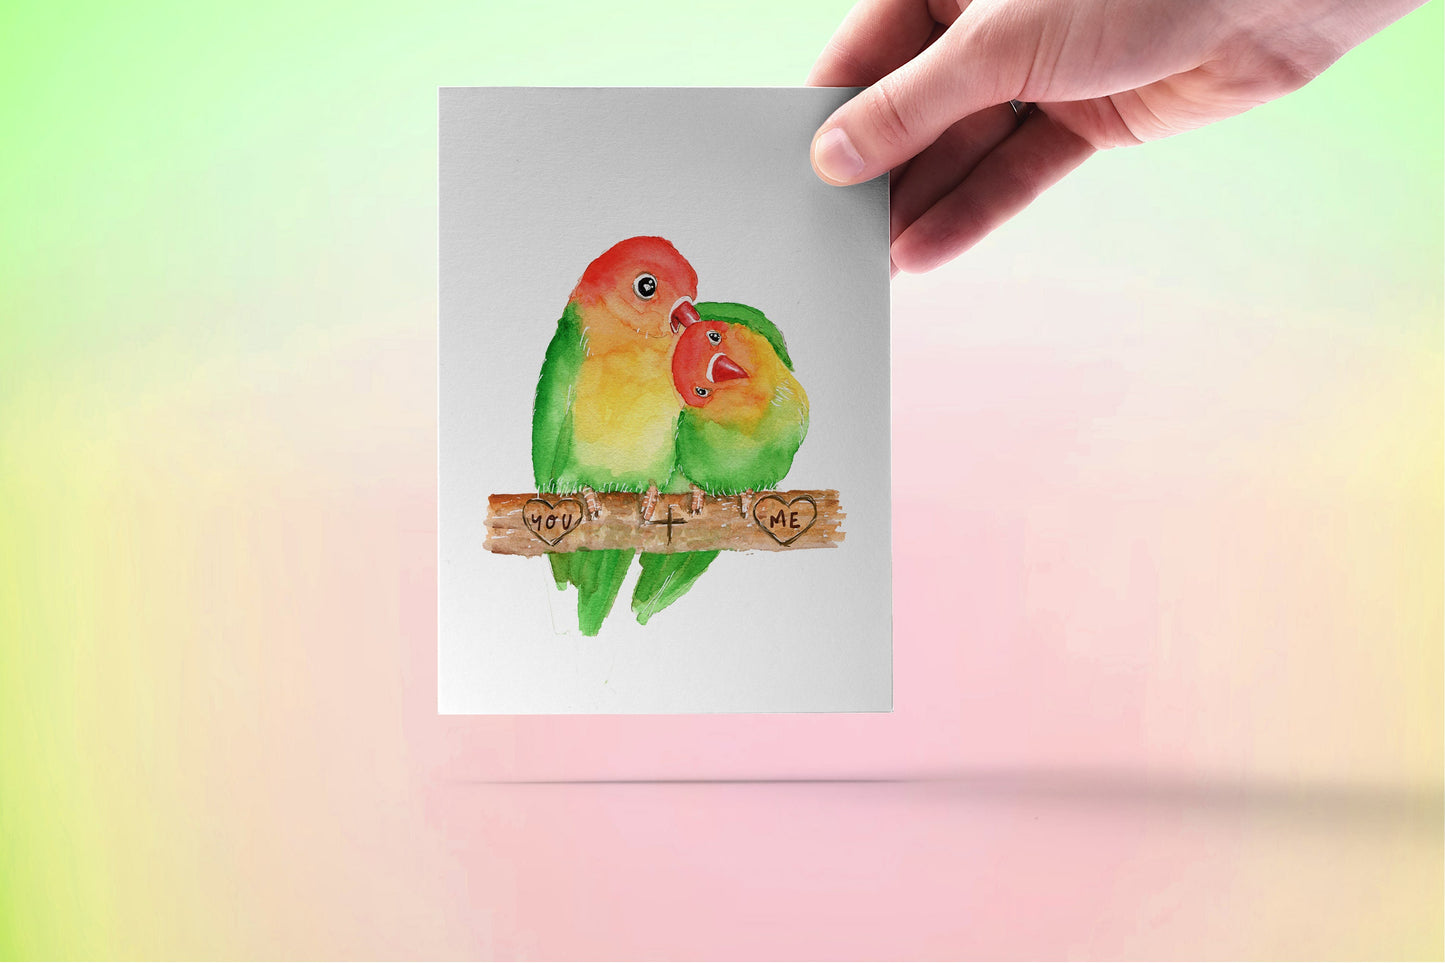 Lovebird Couple Valentine's Day Card For Wife - Cute Anniversary Card For Boyfriend - Custom Anniversary Card For Husband